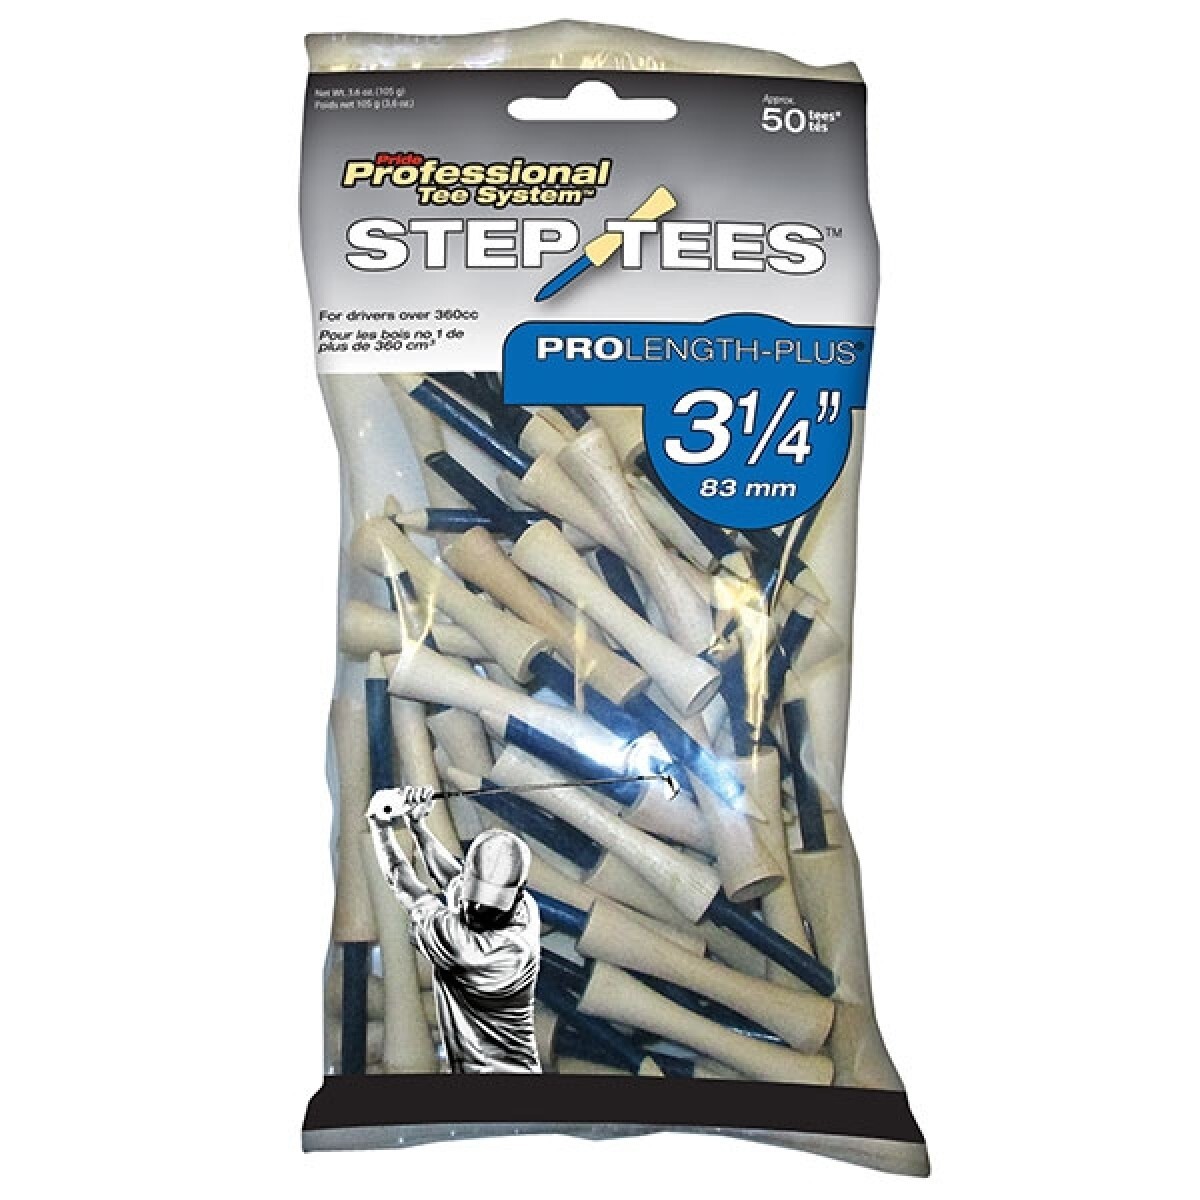 TEES PRIDE PROFESSIONAL Tee System - PROLENGTH-PLUS 3 1/4" 83mm x 50 unidades 